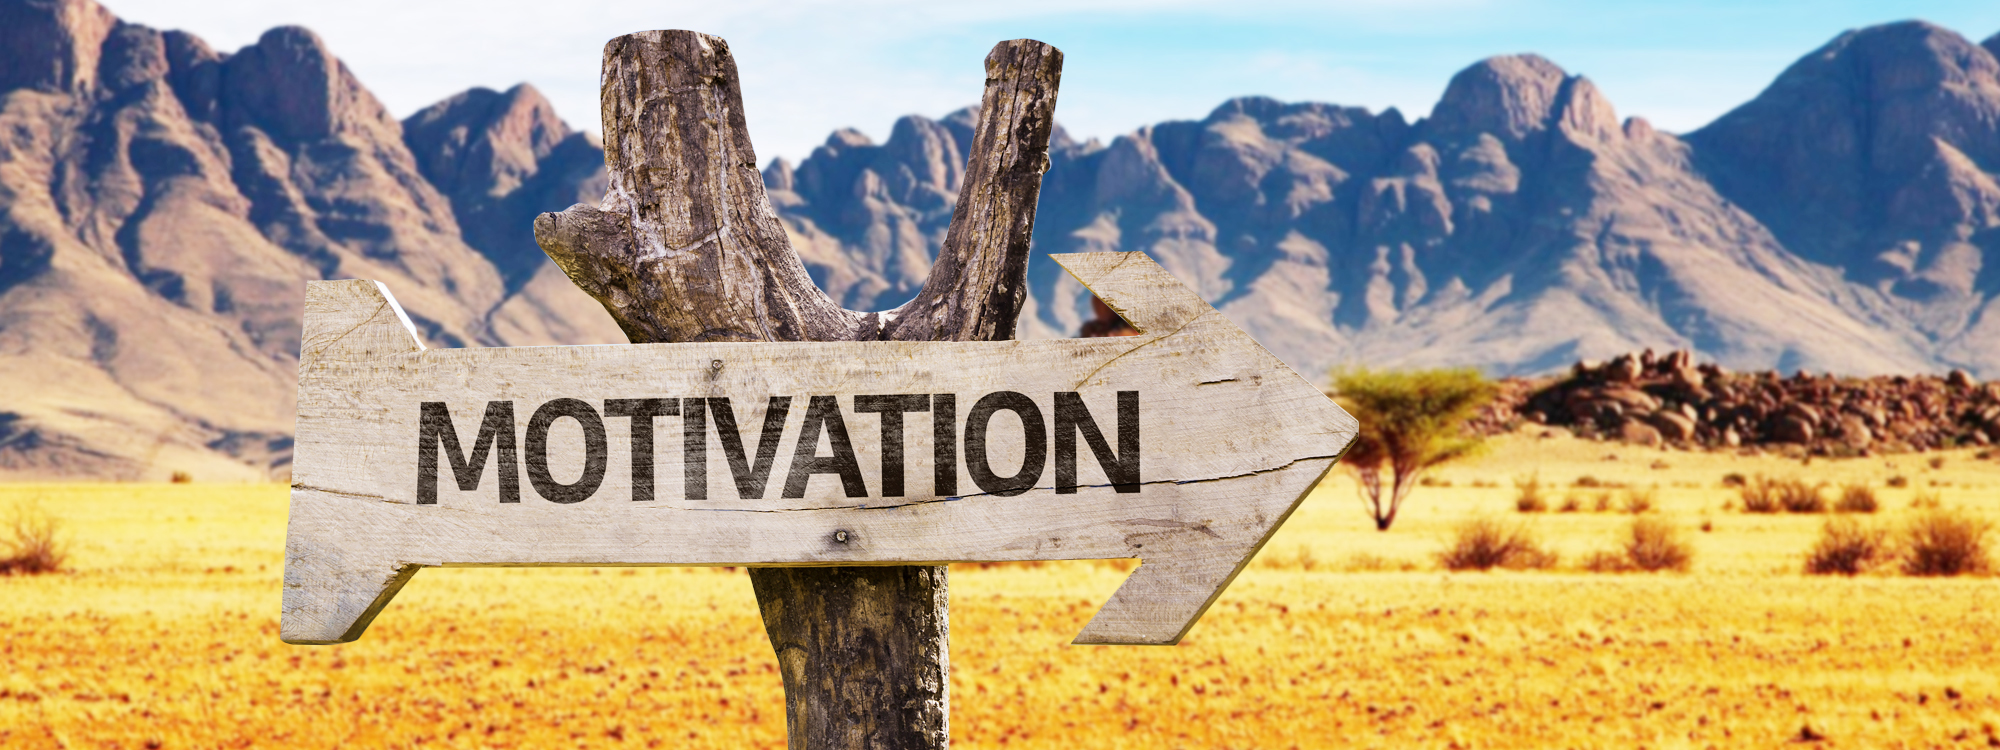 Master Your Motivation And Succeed - by Bev James